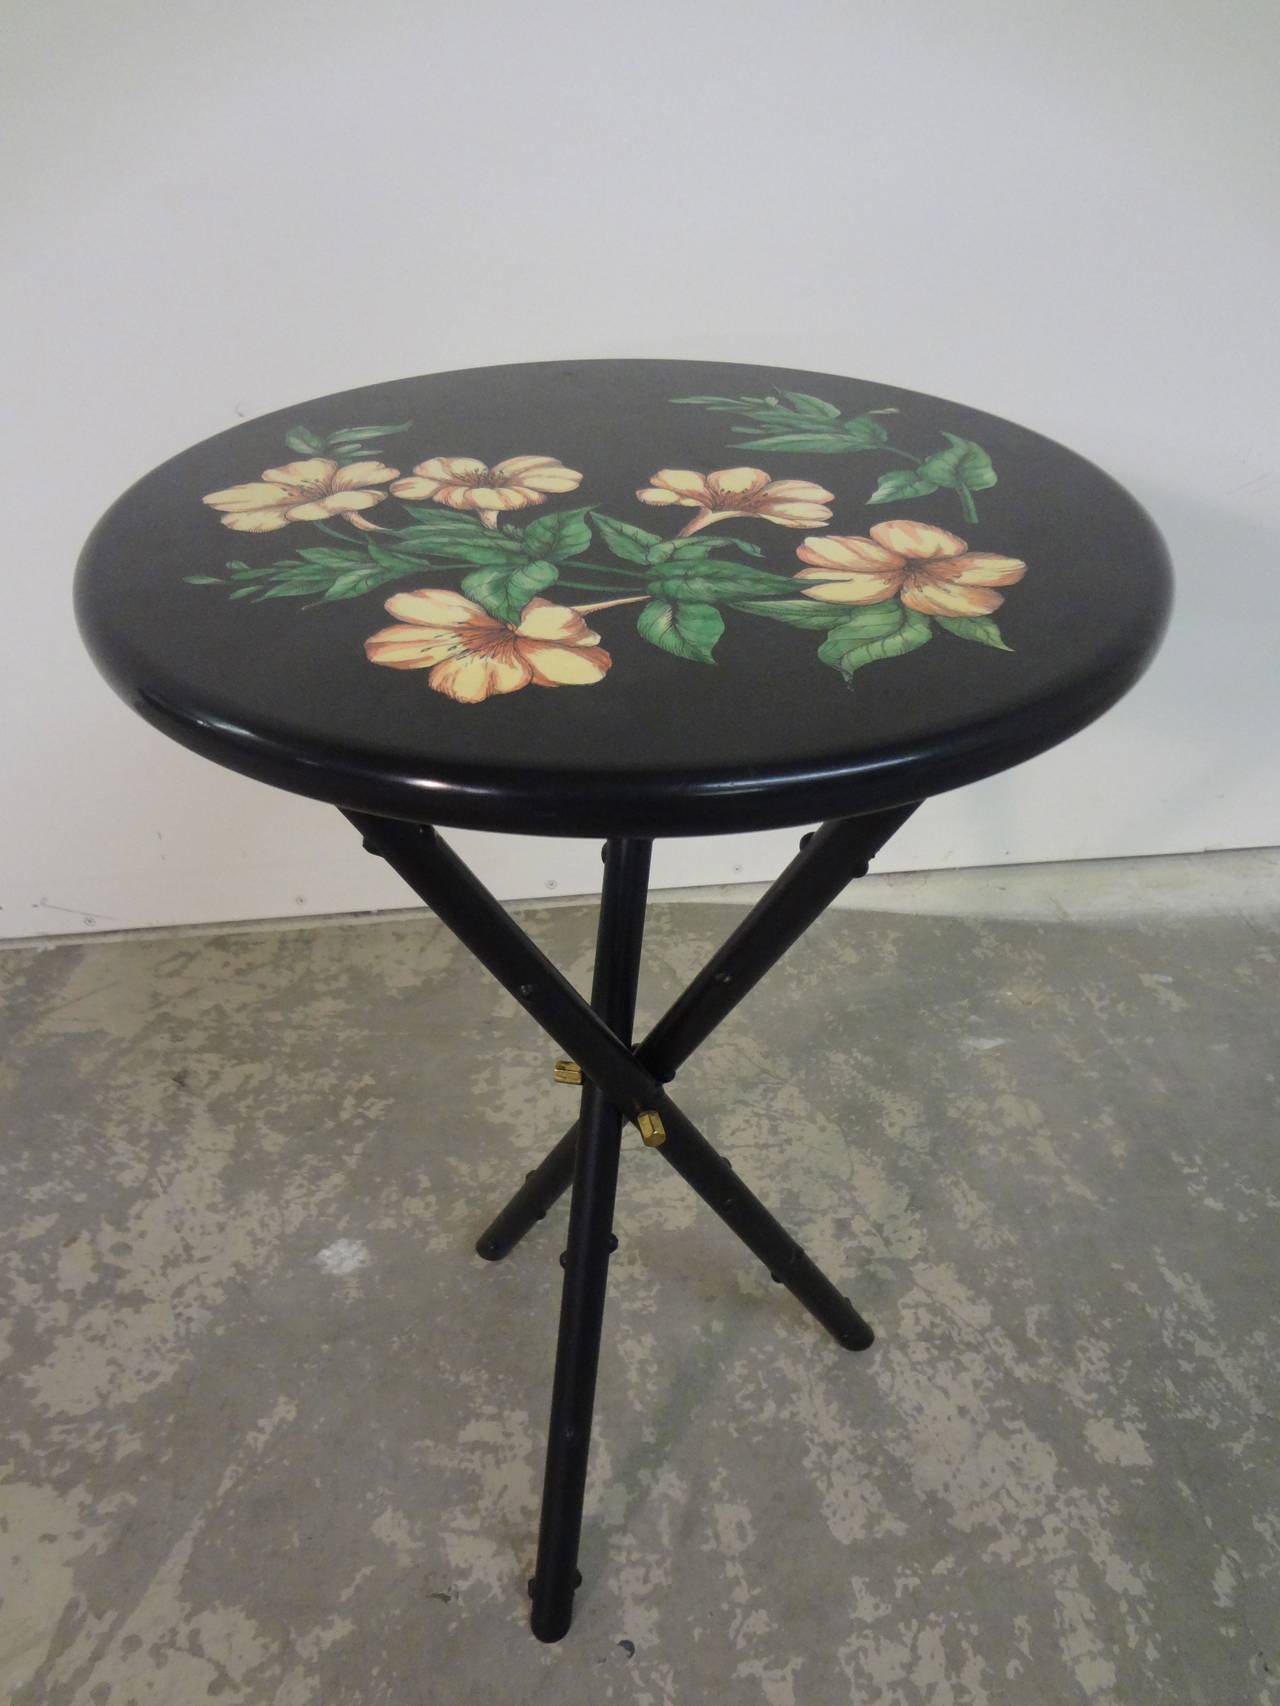 Occasional table by Piero Fornasetti, circa 1960s with original brass hardware and label present.